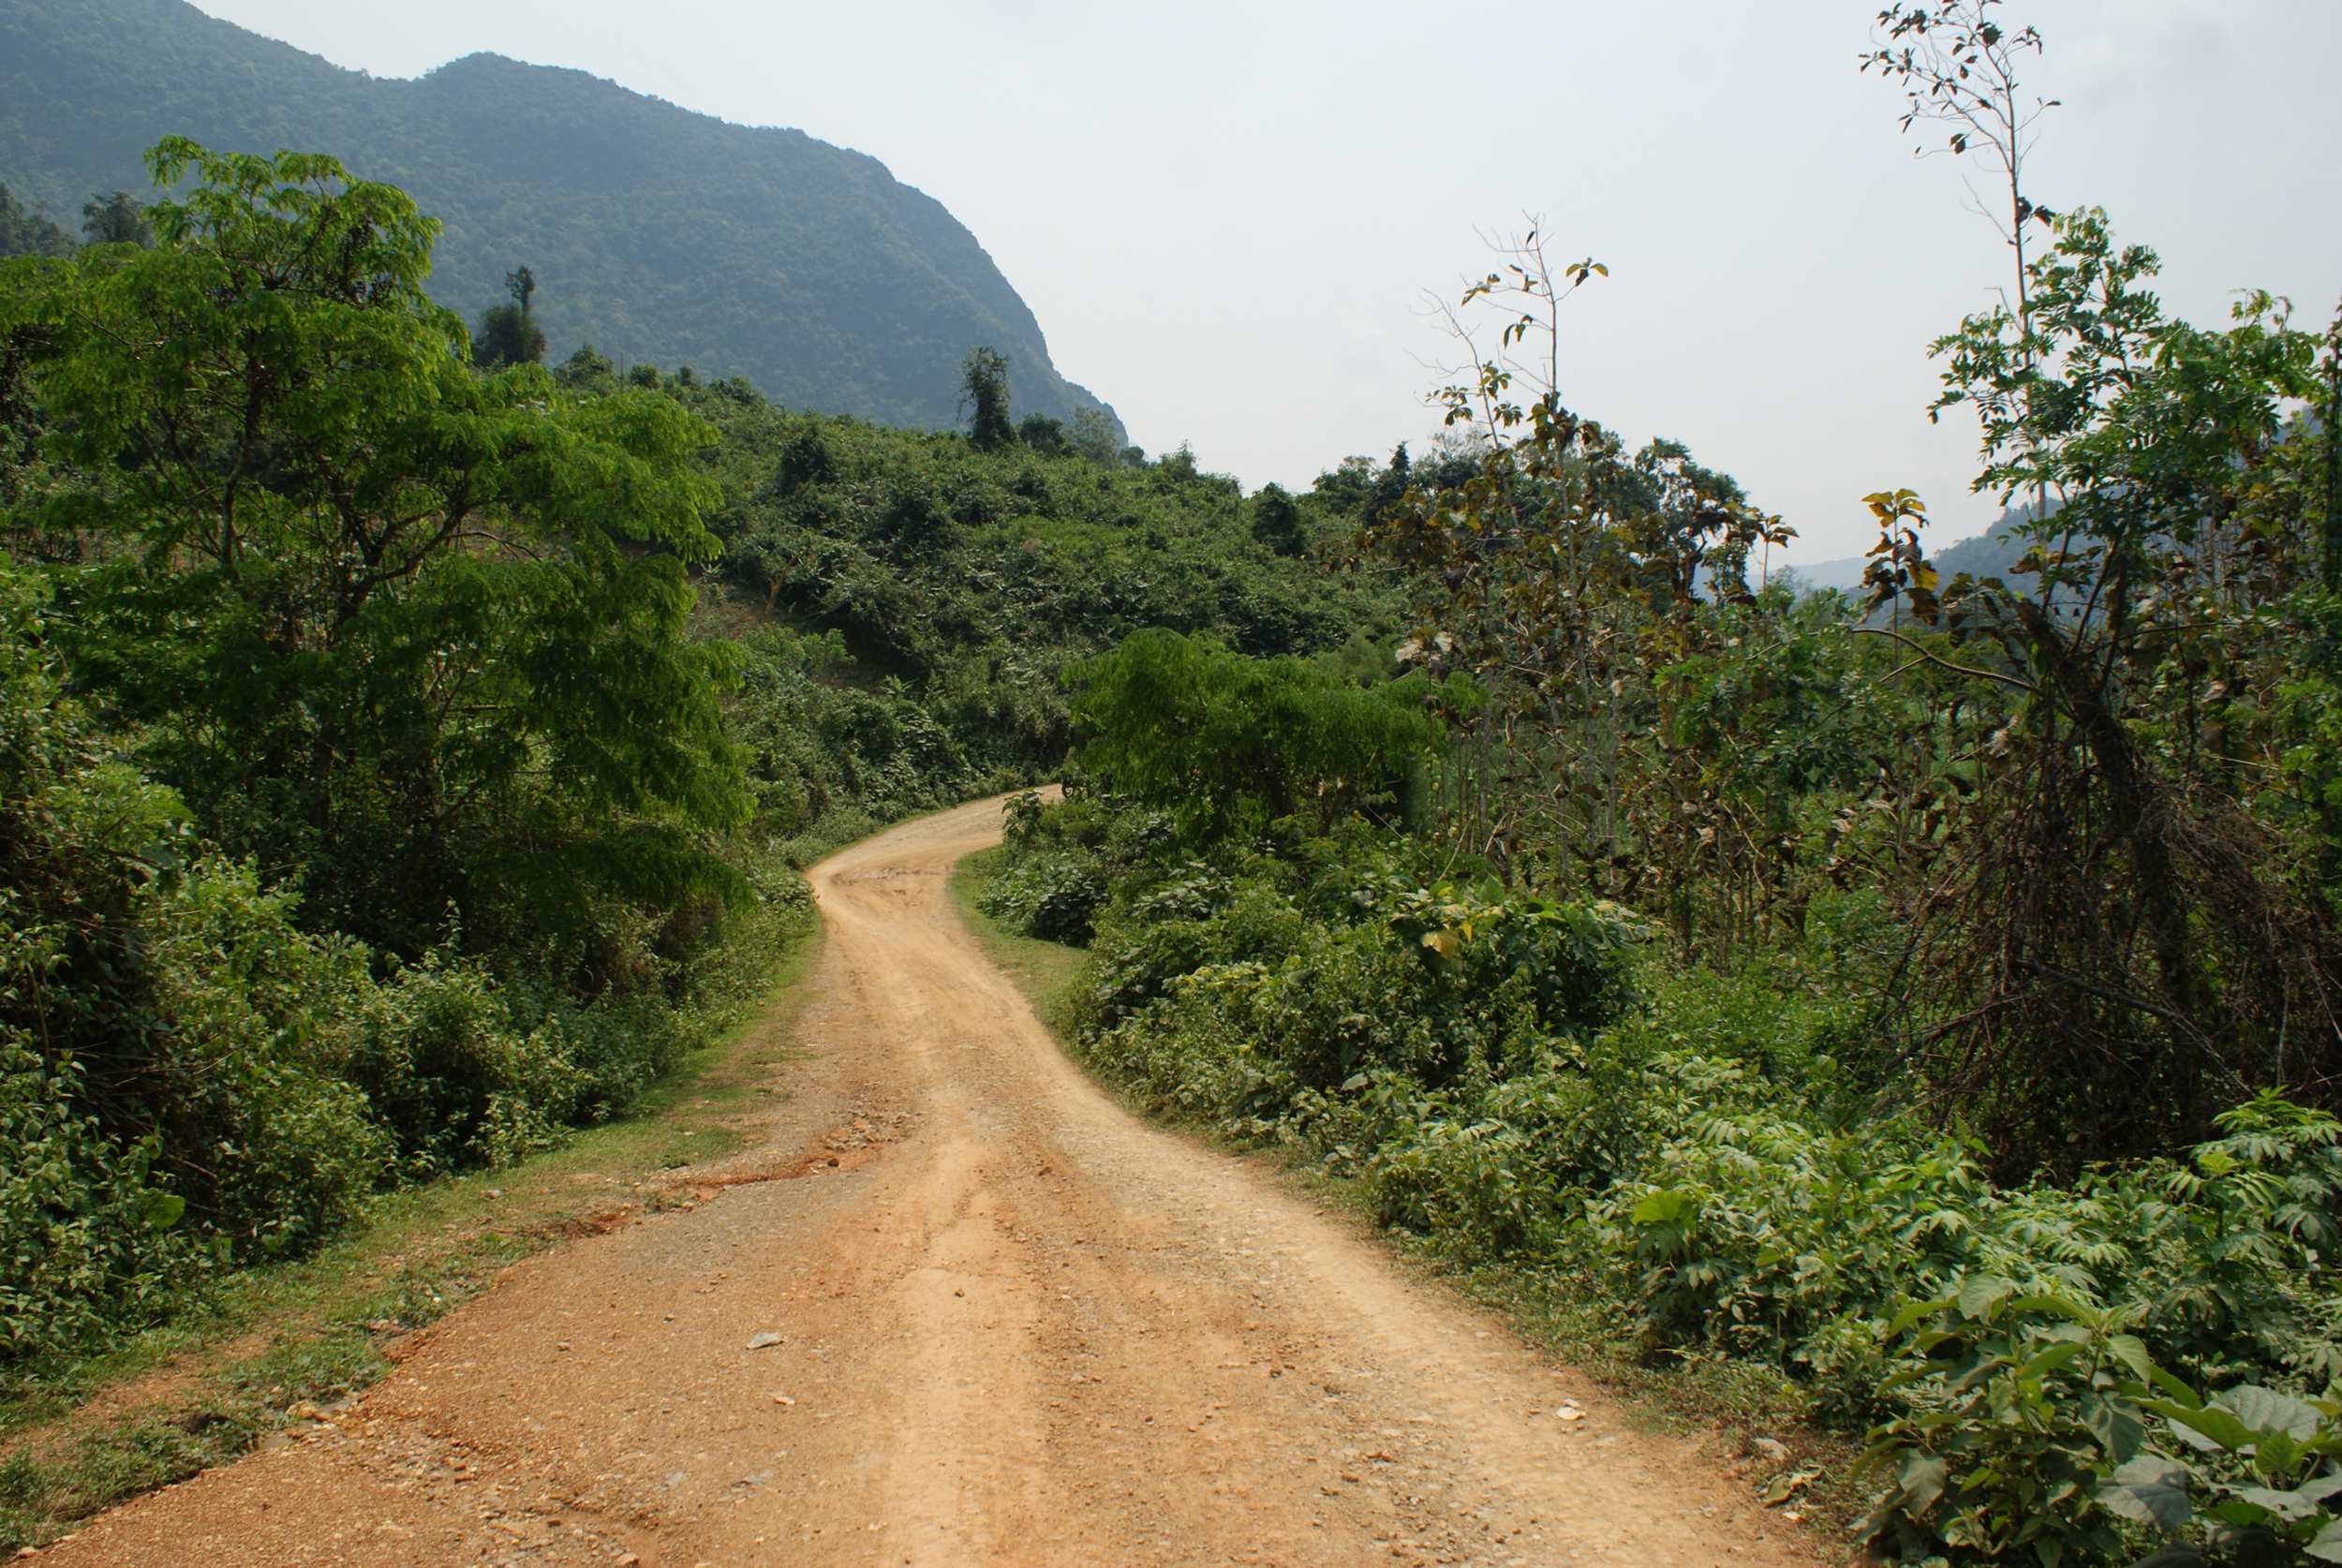 The road ahead, the only road to the next village